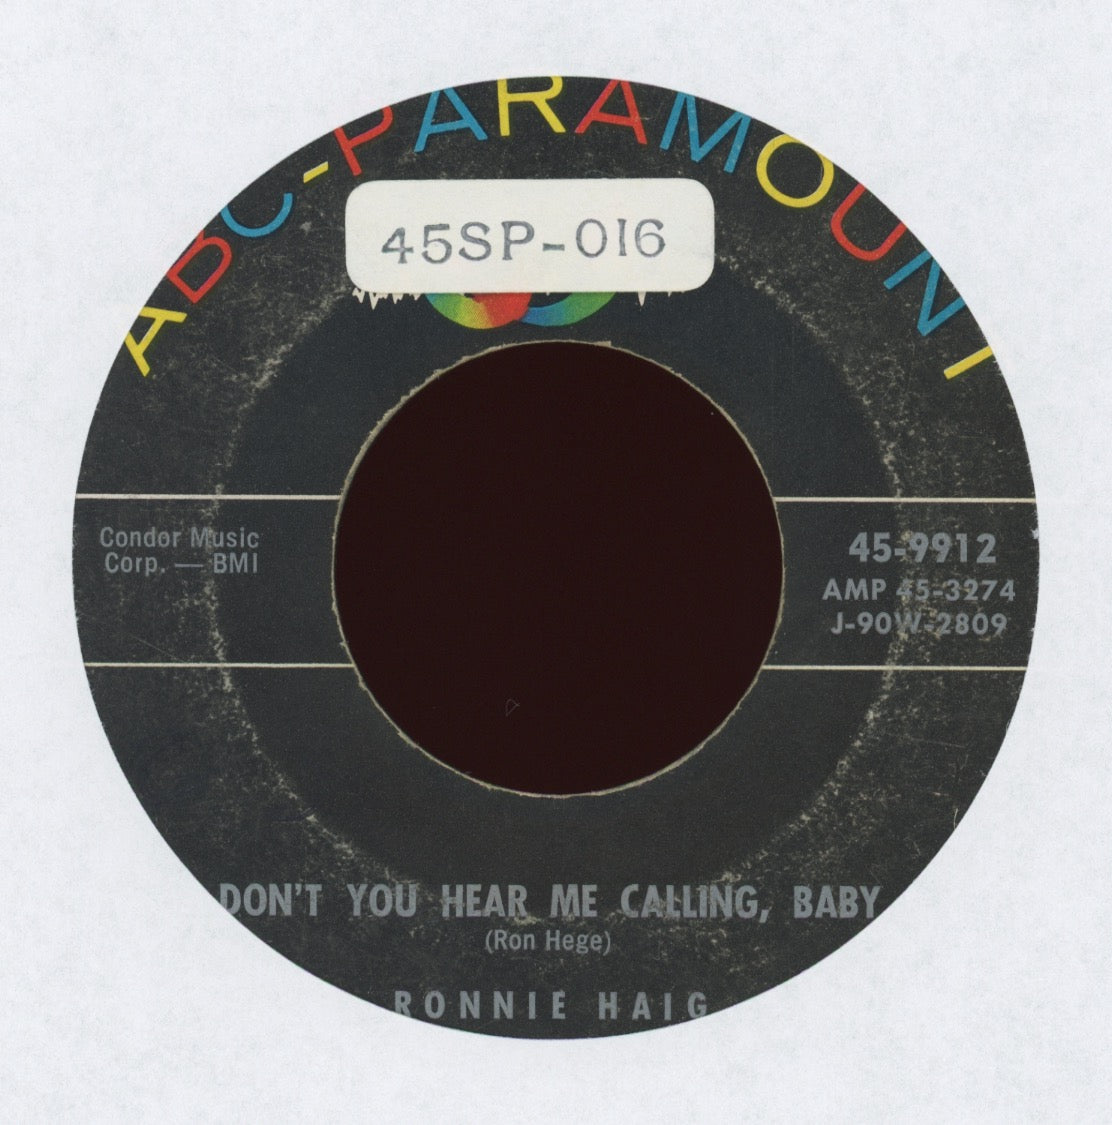 Ronnie Haig - Don't You Hear Me Calling, Baby on ABC Paramount